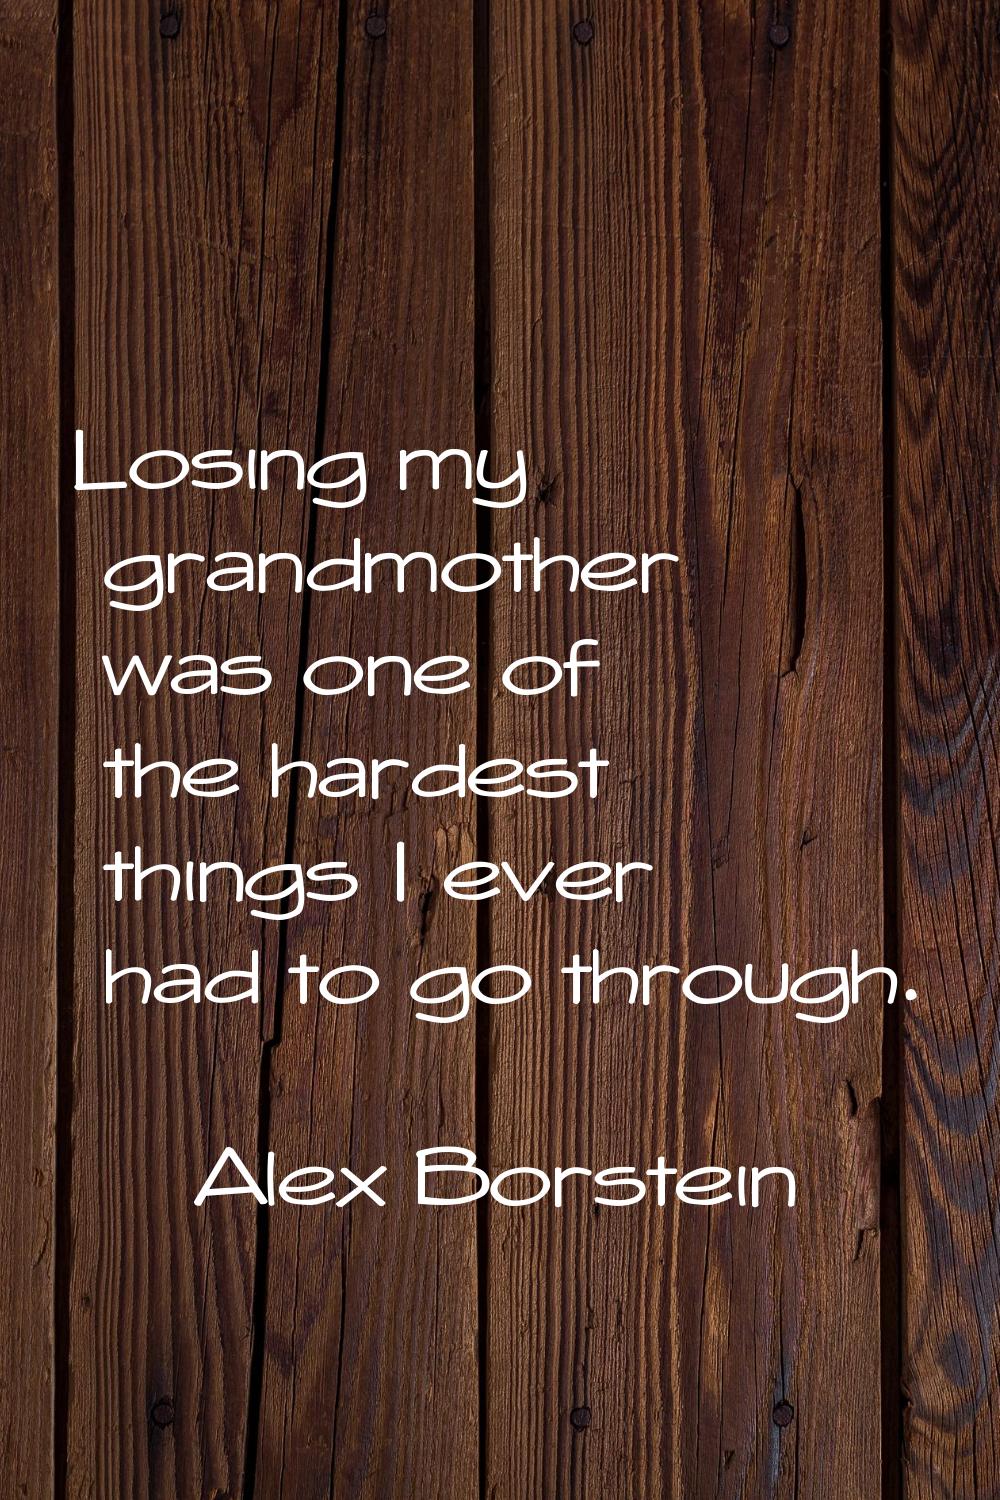 Losing my grandmother was one of the hardest things I ever had to go through.